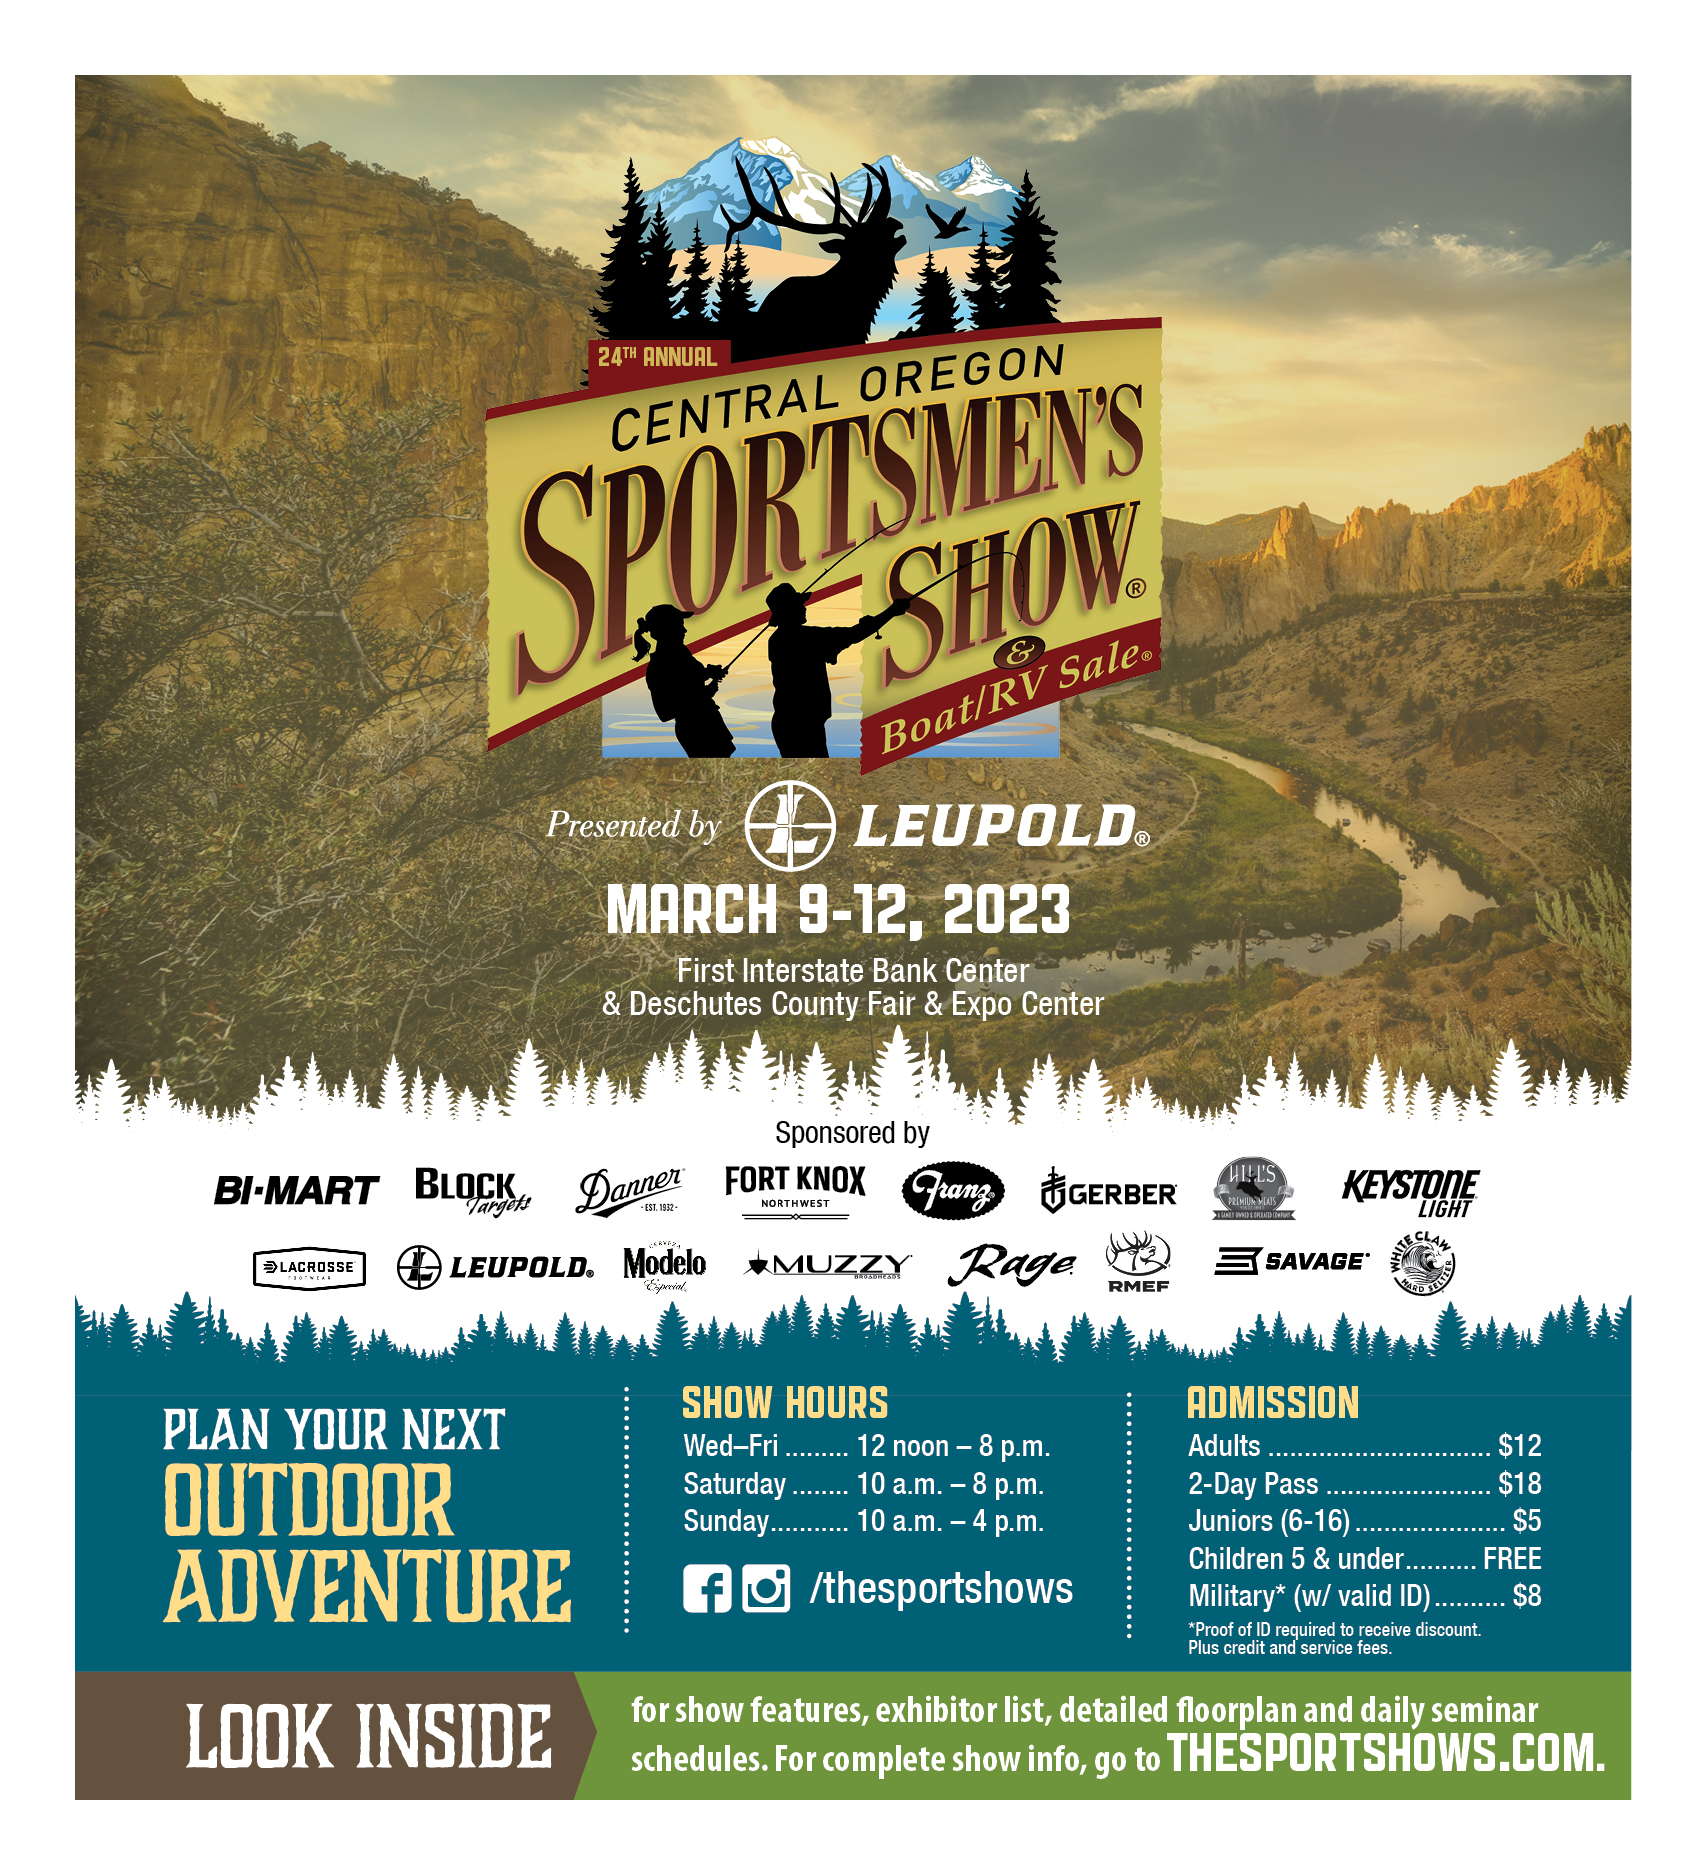 Central Oregon Sportsmen's Show Fishing, Hunting, and Outdoor Recreation